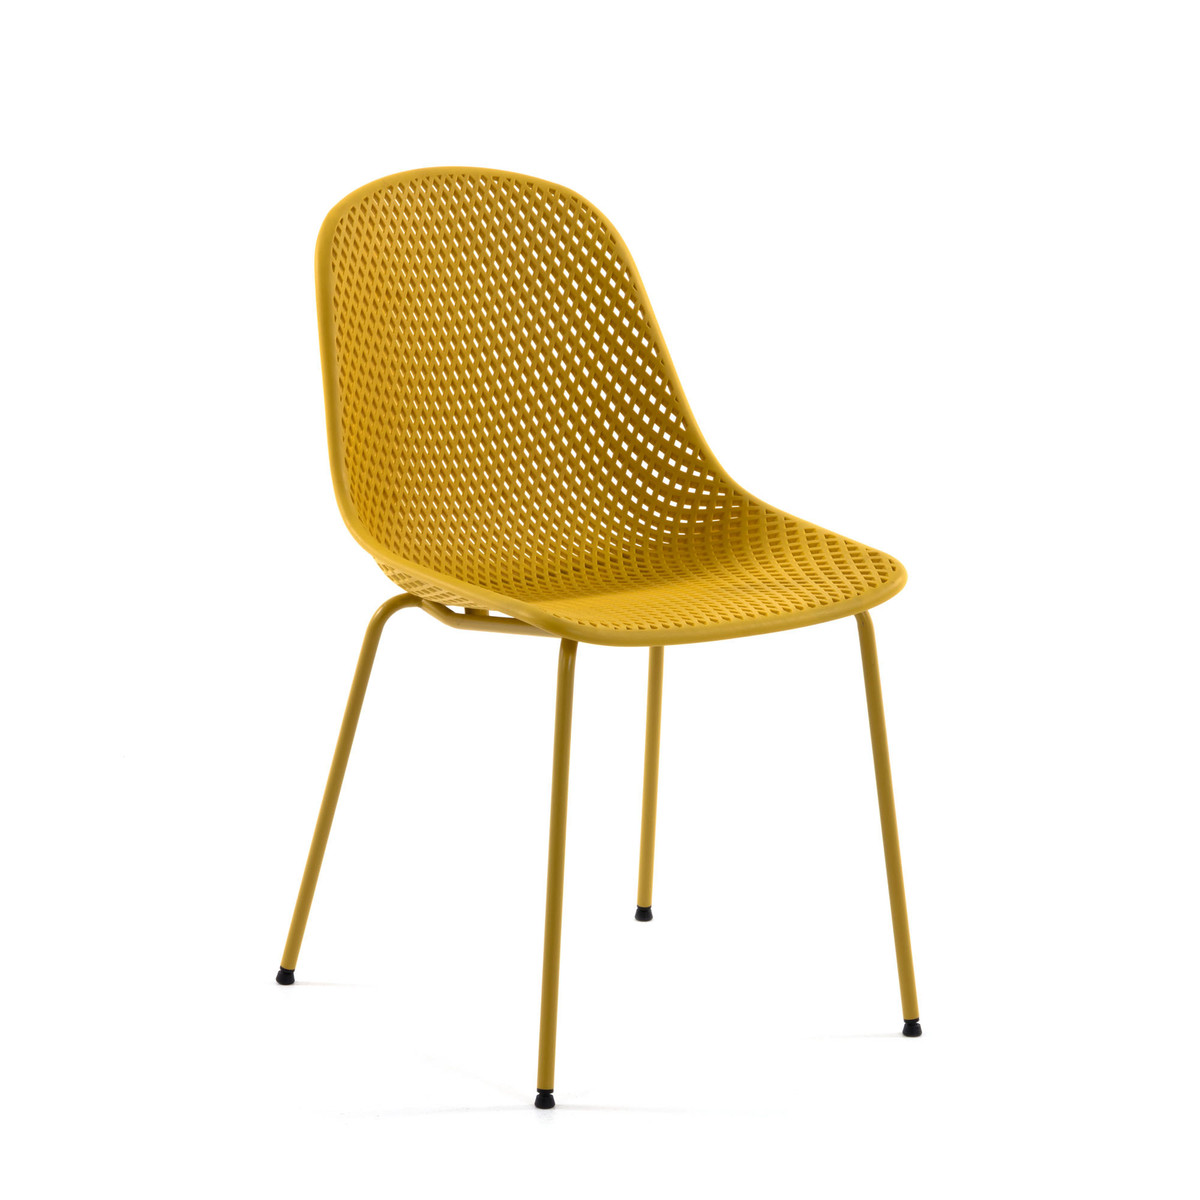 CC1222S31 0 - Quinby Dining Chair - Mustard